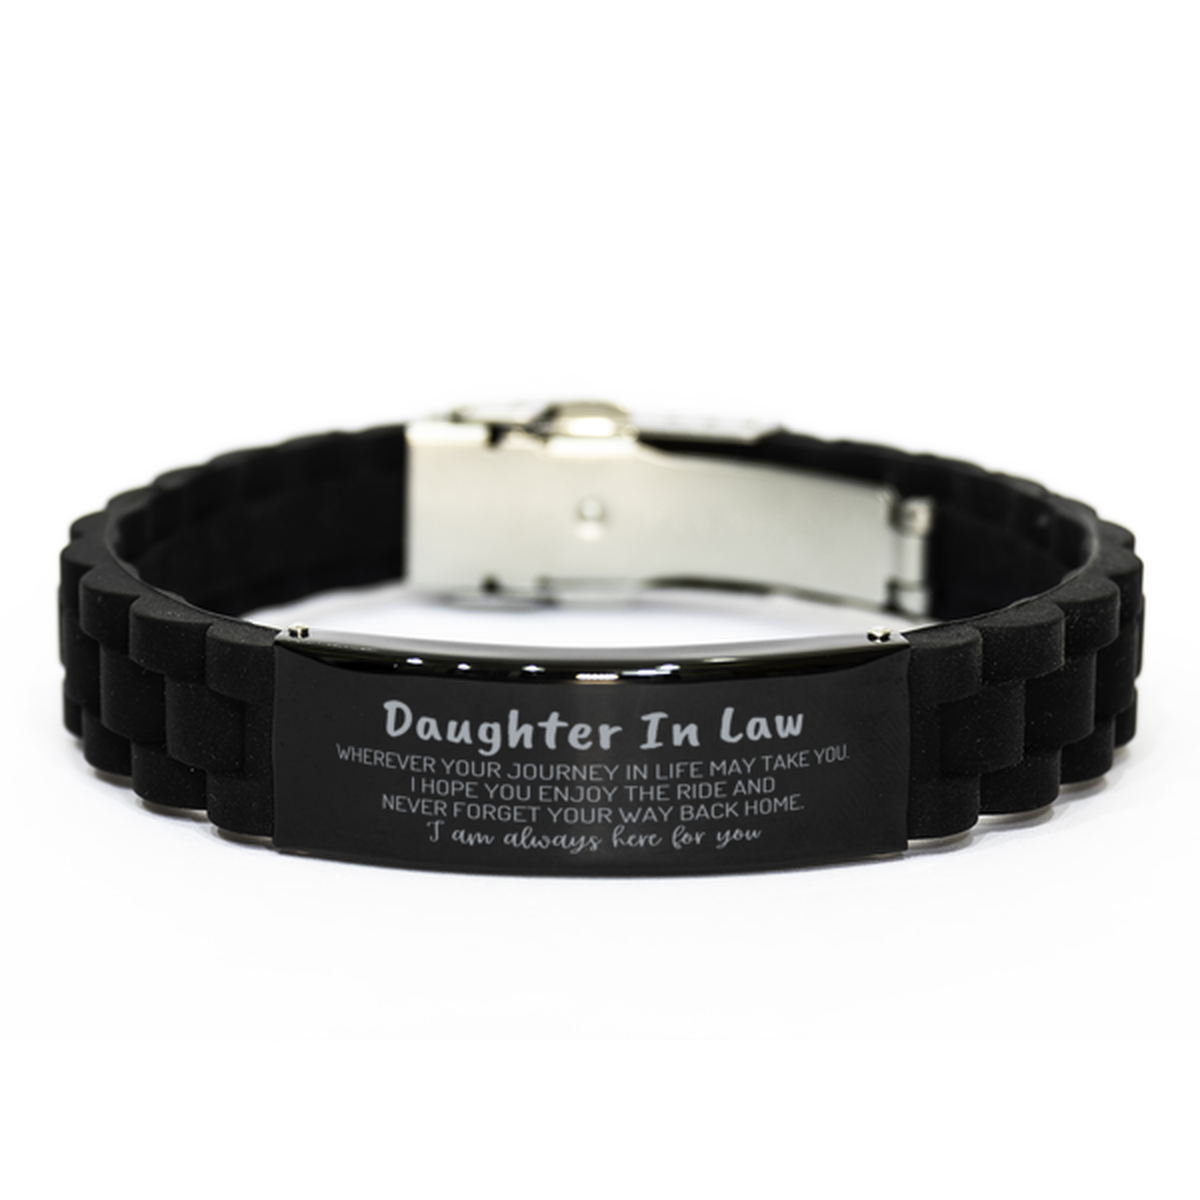 Daughter In Law wherever your journey in life may take you, I am always here for you Daughter In Law Black Glidelock Clasp Bracelet, Awesome Christmas Gifts For Daughter In Law, Daughter In Law Birthday Gifts for Men Women Family Loved One